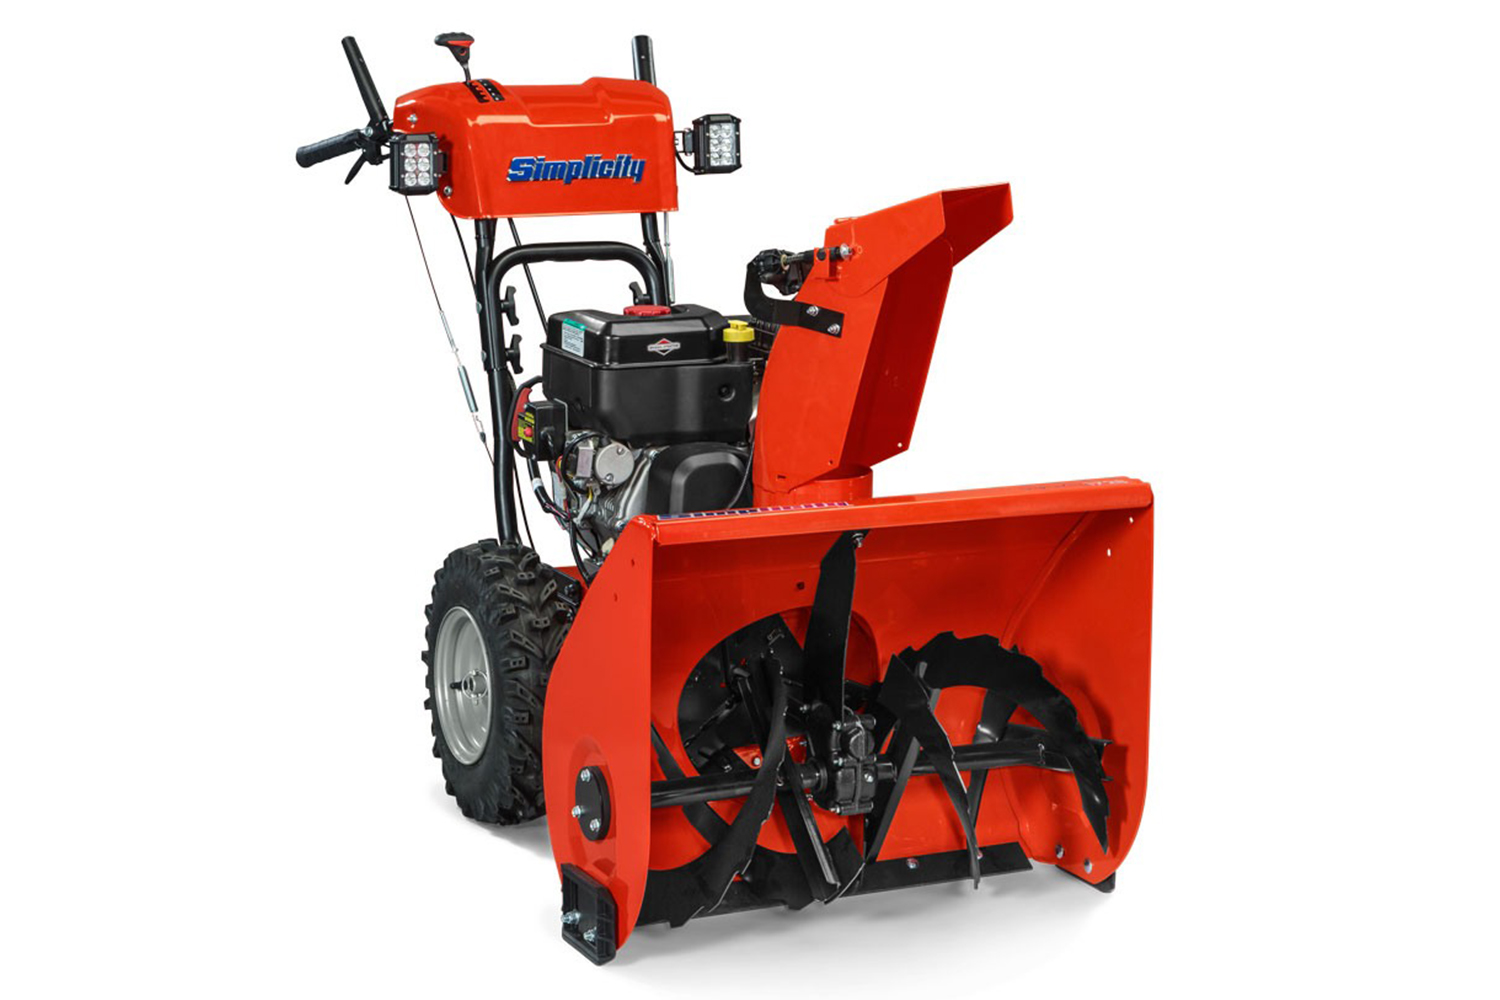 SIMPLICITY SIGNATURE SERIES DUAL-STAGE SNOW BLOWERS 1524<br/>*Model shown in image may vary.